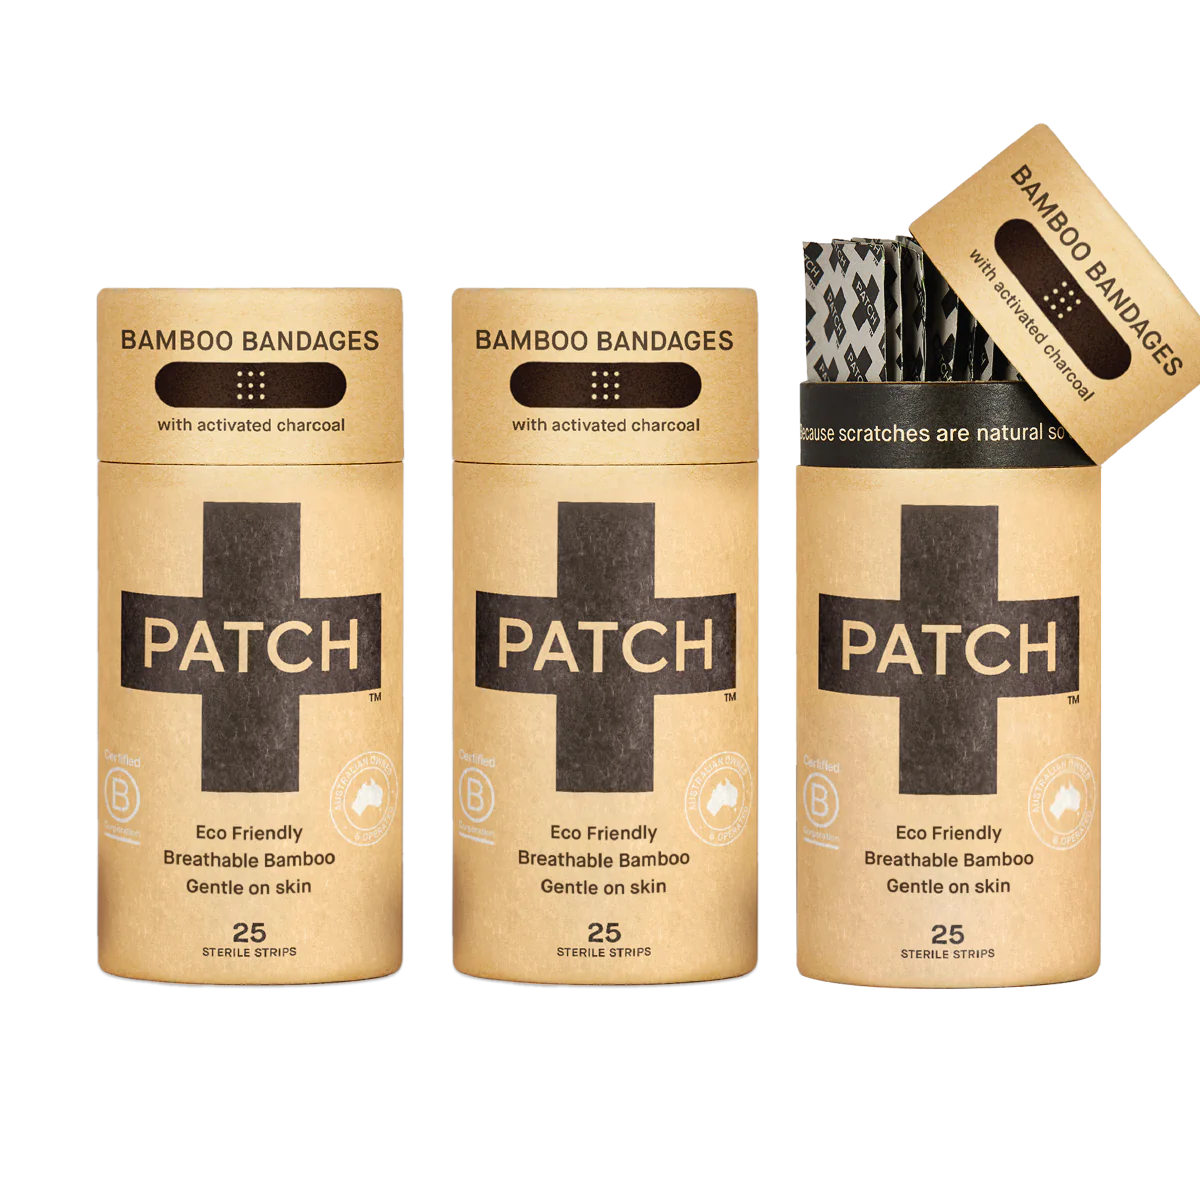 PATCH Charcoal Bamboo Bandages